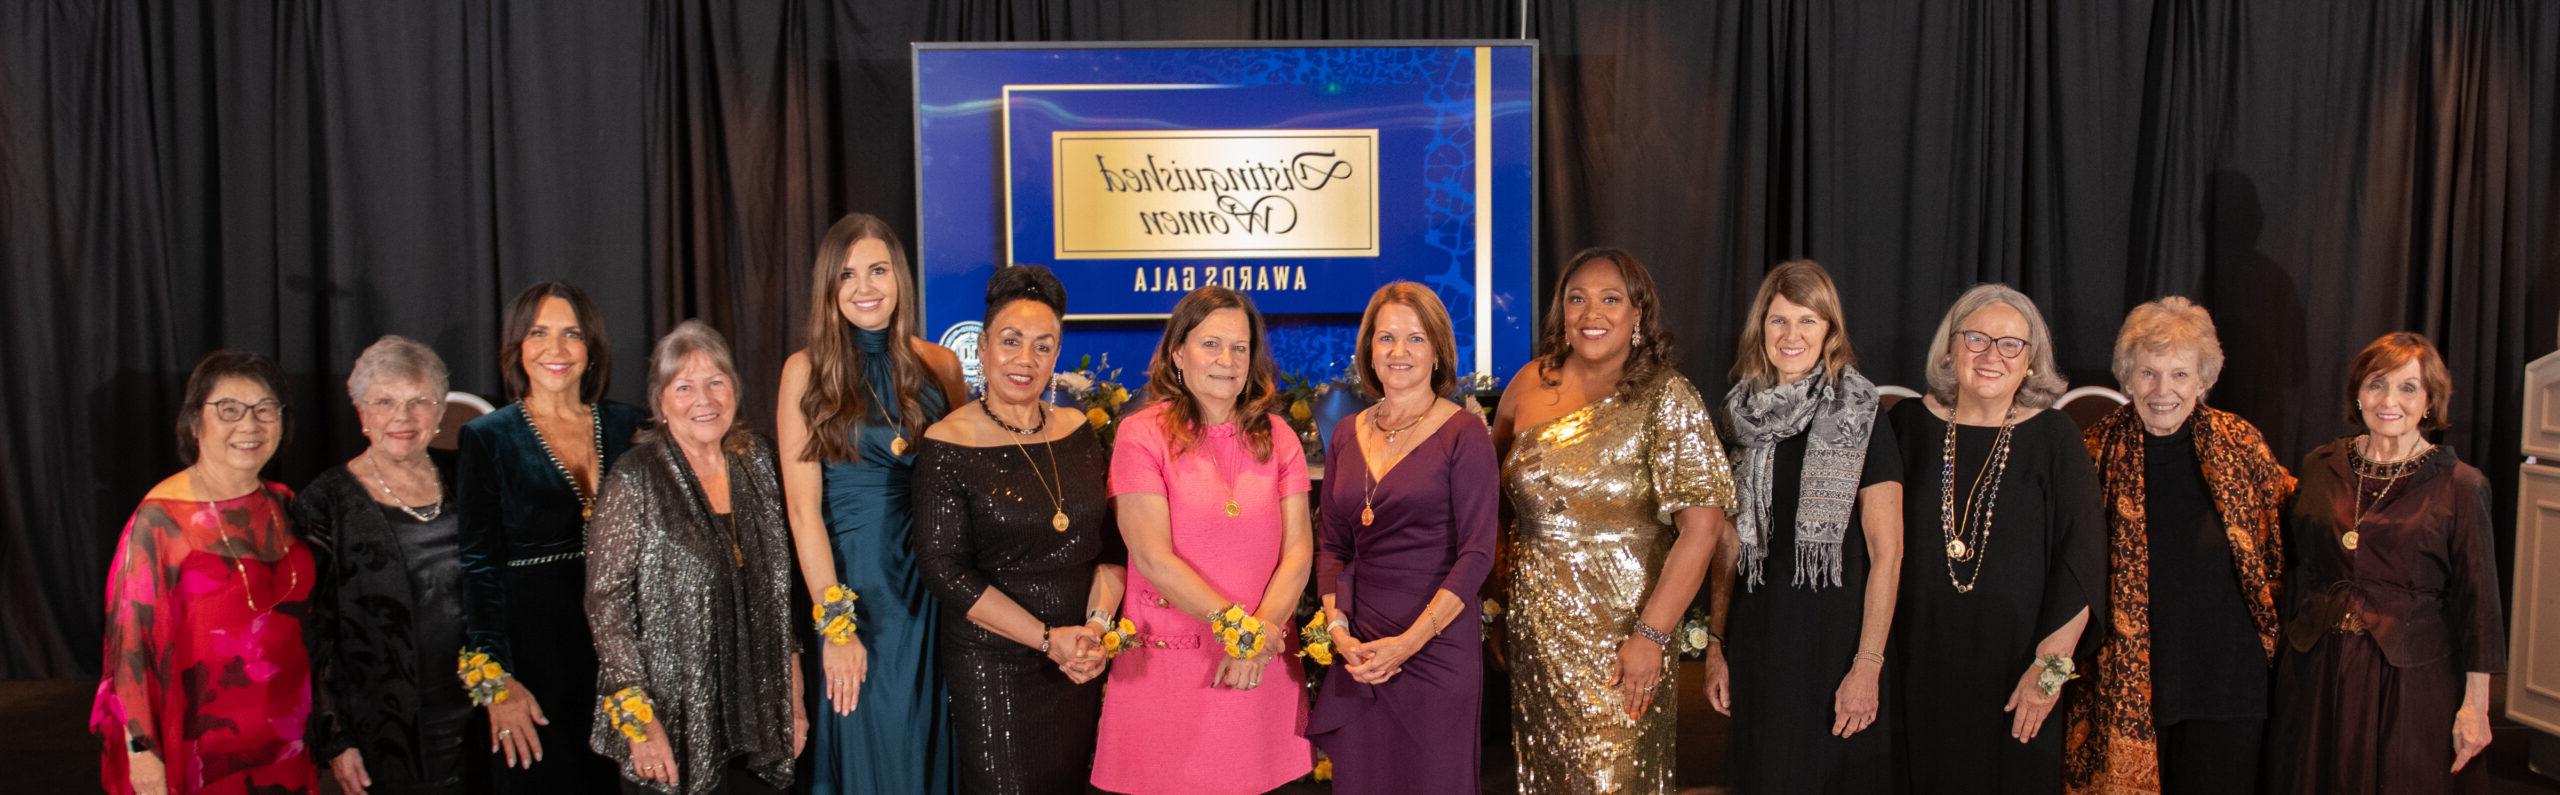 Distinguished Women honorees taking a group photo